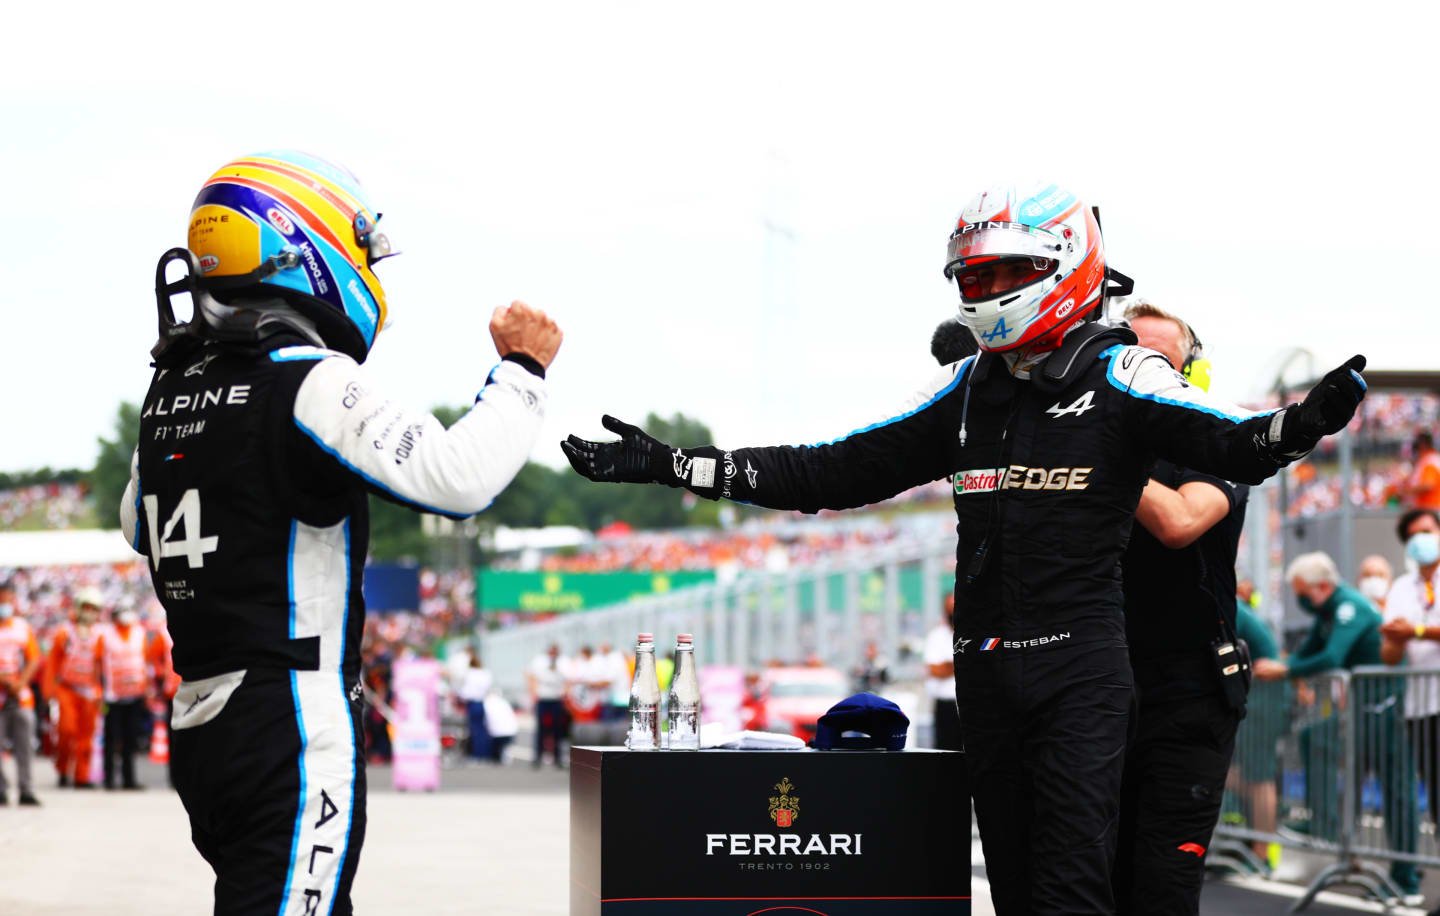 BUDAPEST, HUNGARY - AUGUST 01: Race winner Esteban Ocon of France and Alpine F1 Team and fifth placed Fernando Alonso of Spain and Alpine F1 Team celebrate in parc ferme during the F1 Grand Prix of Hungary at Hungaroring on August 01, 2021 in Budapest, Hungary. (Photo by Dan Istitene - Formula 1/Formula 1 via Getty Images)